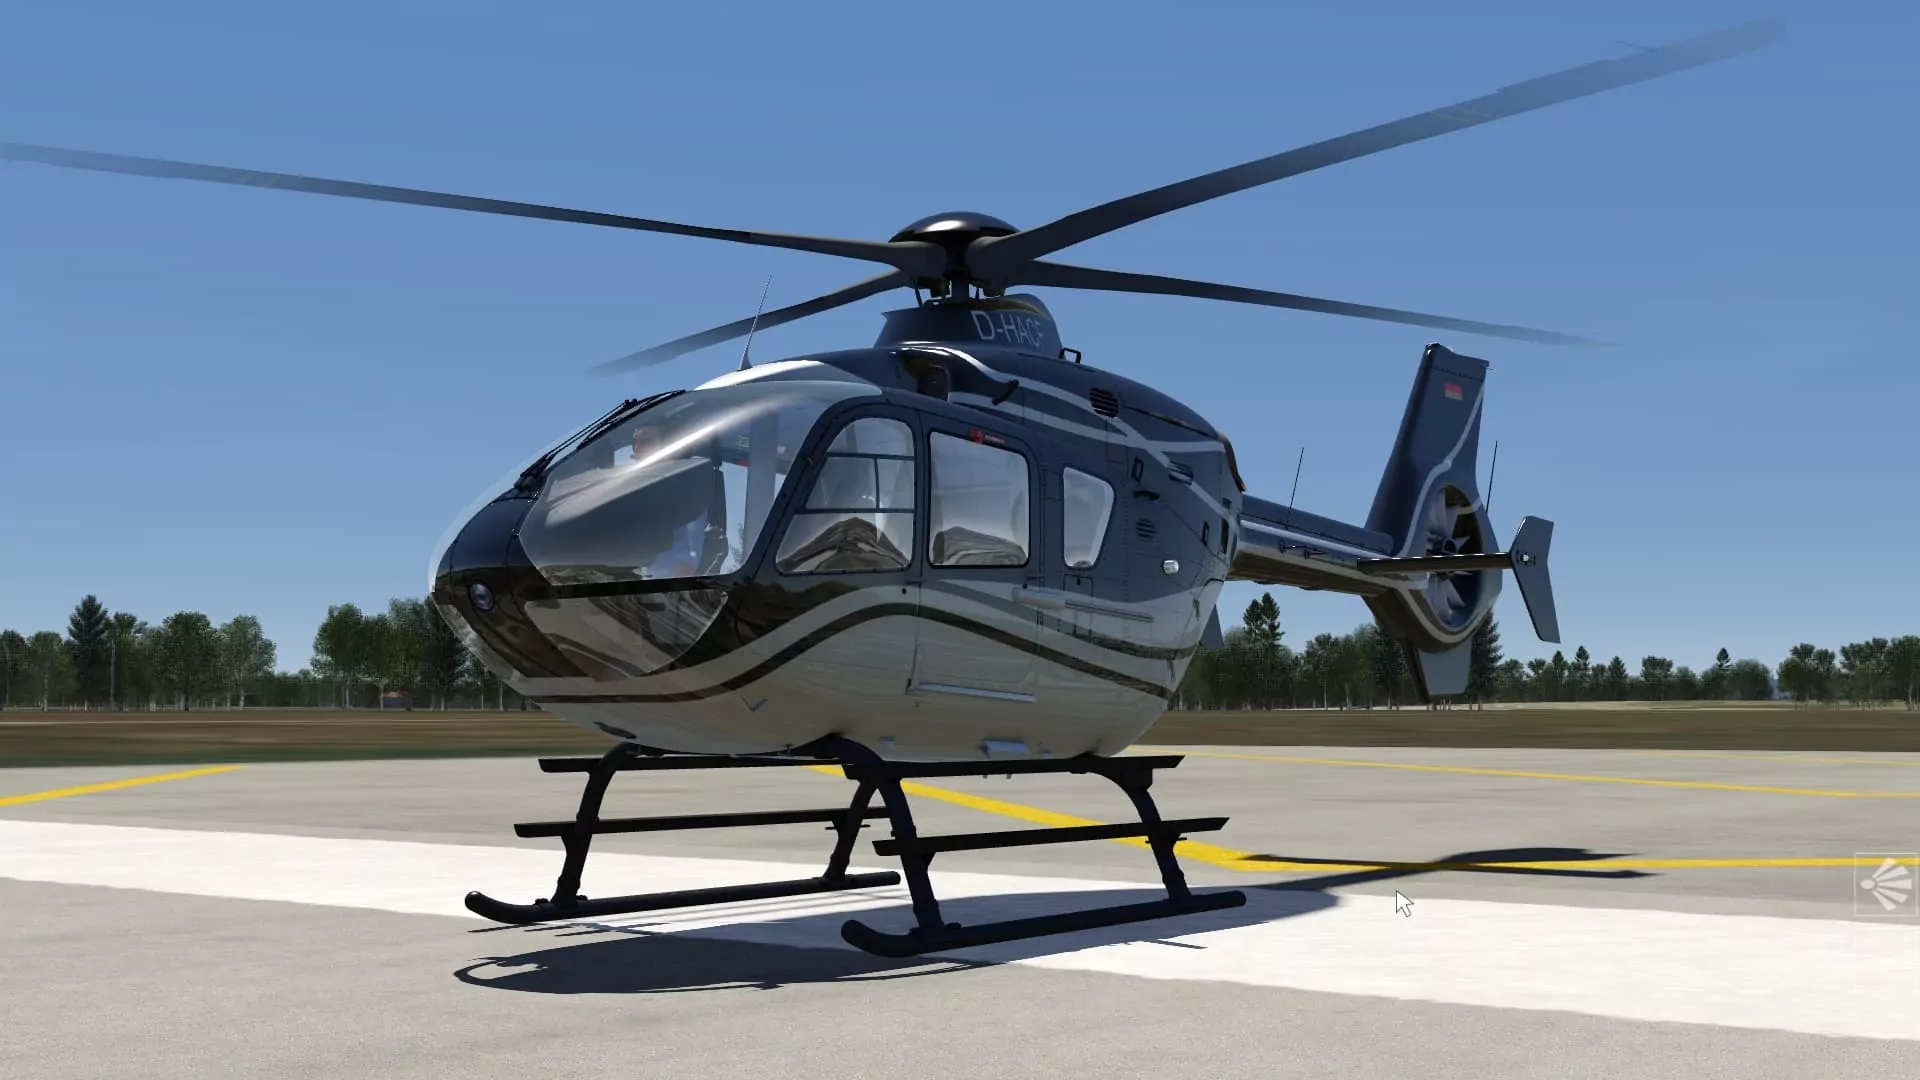 (The Eurocopter EC135 is one of two helicopters in Aerofly FS 4.)